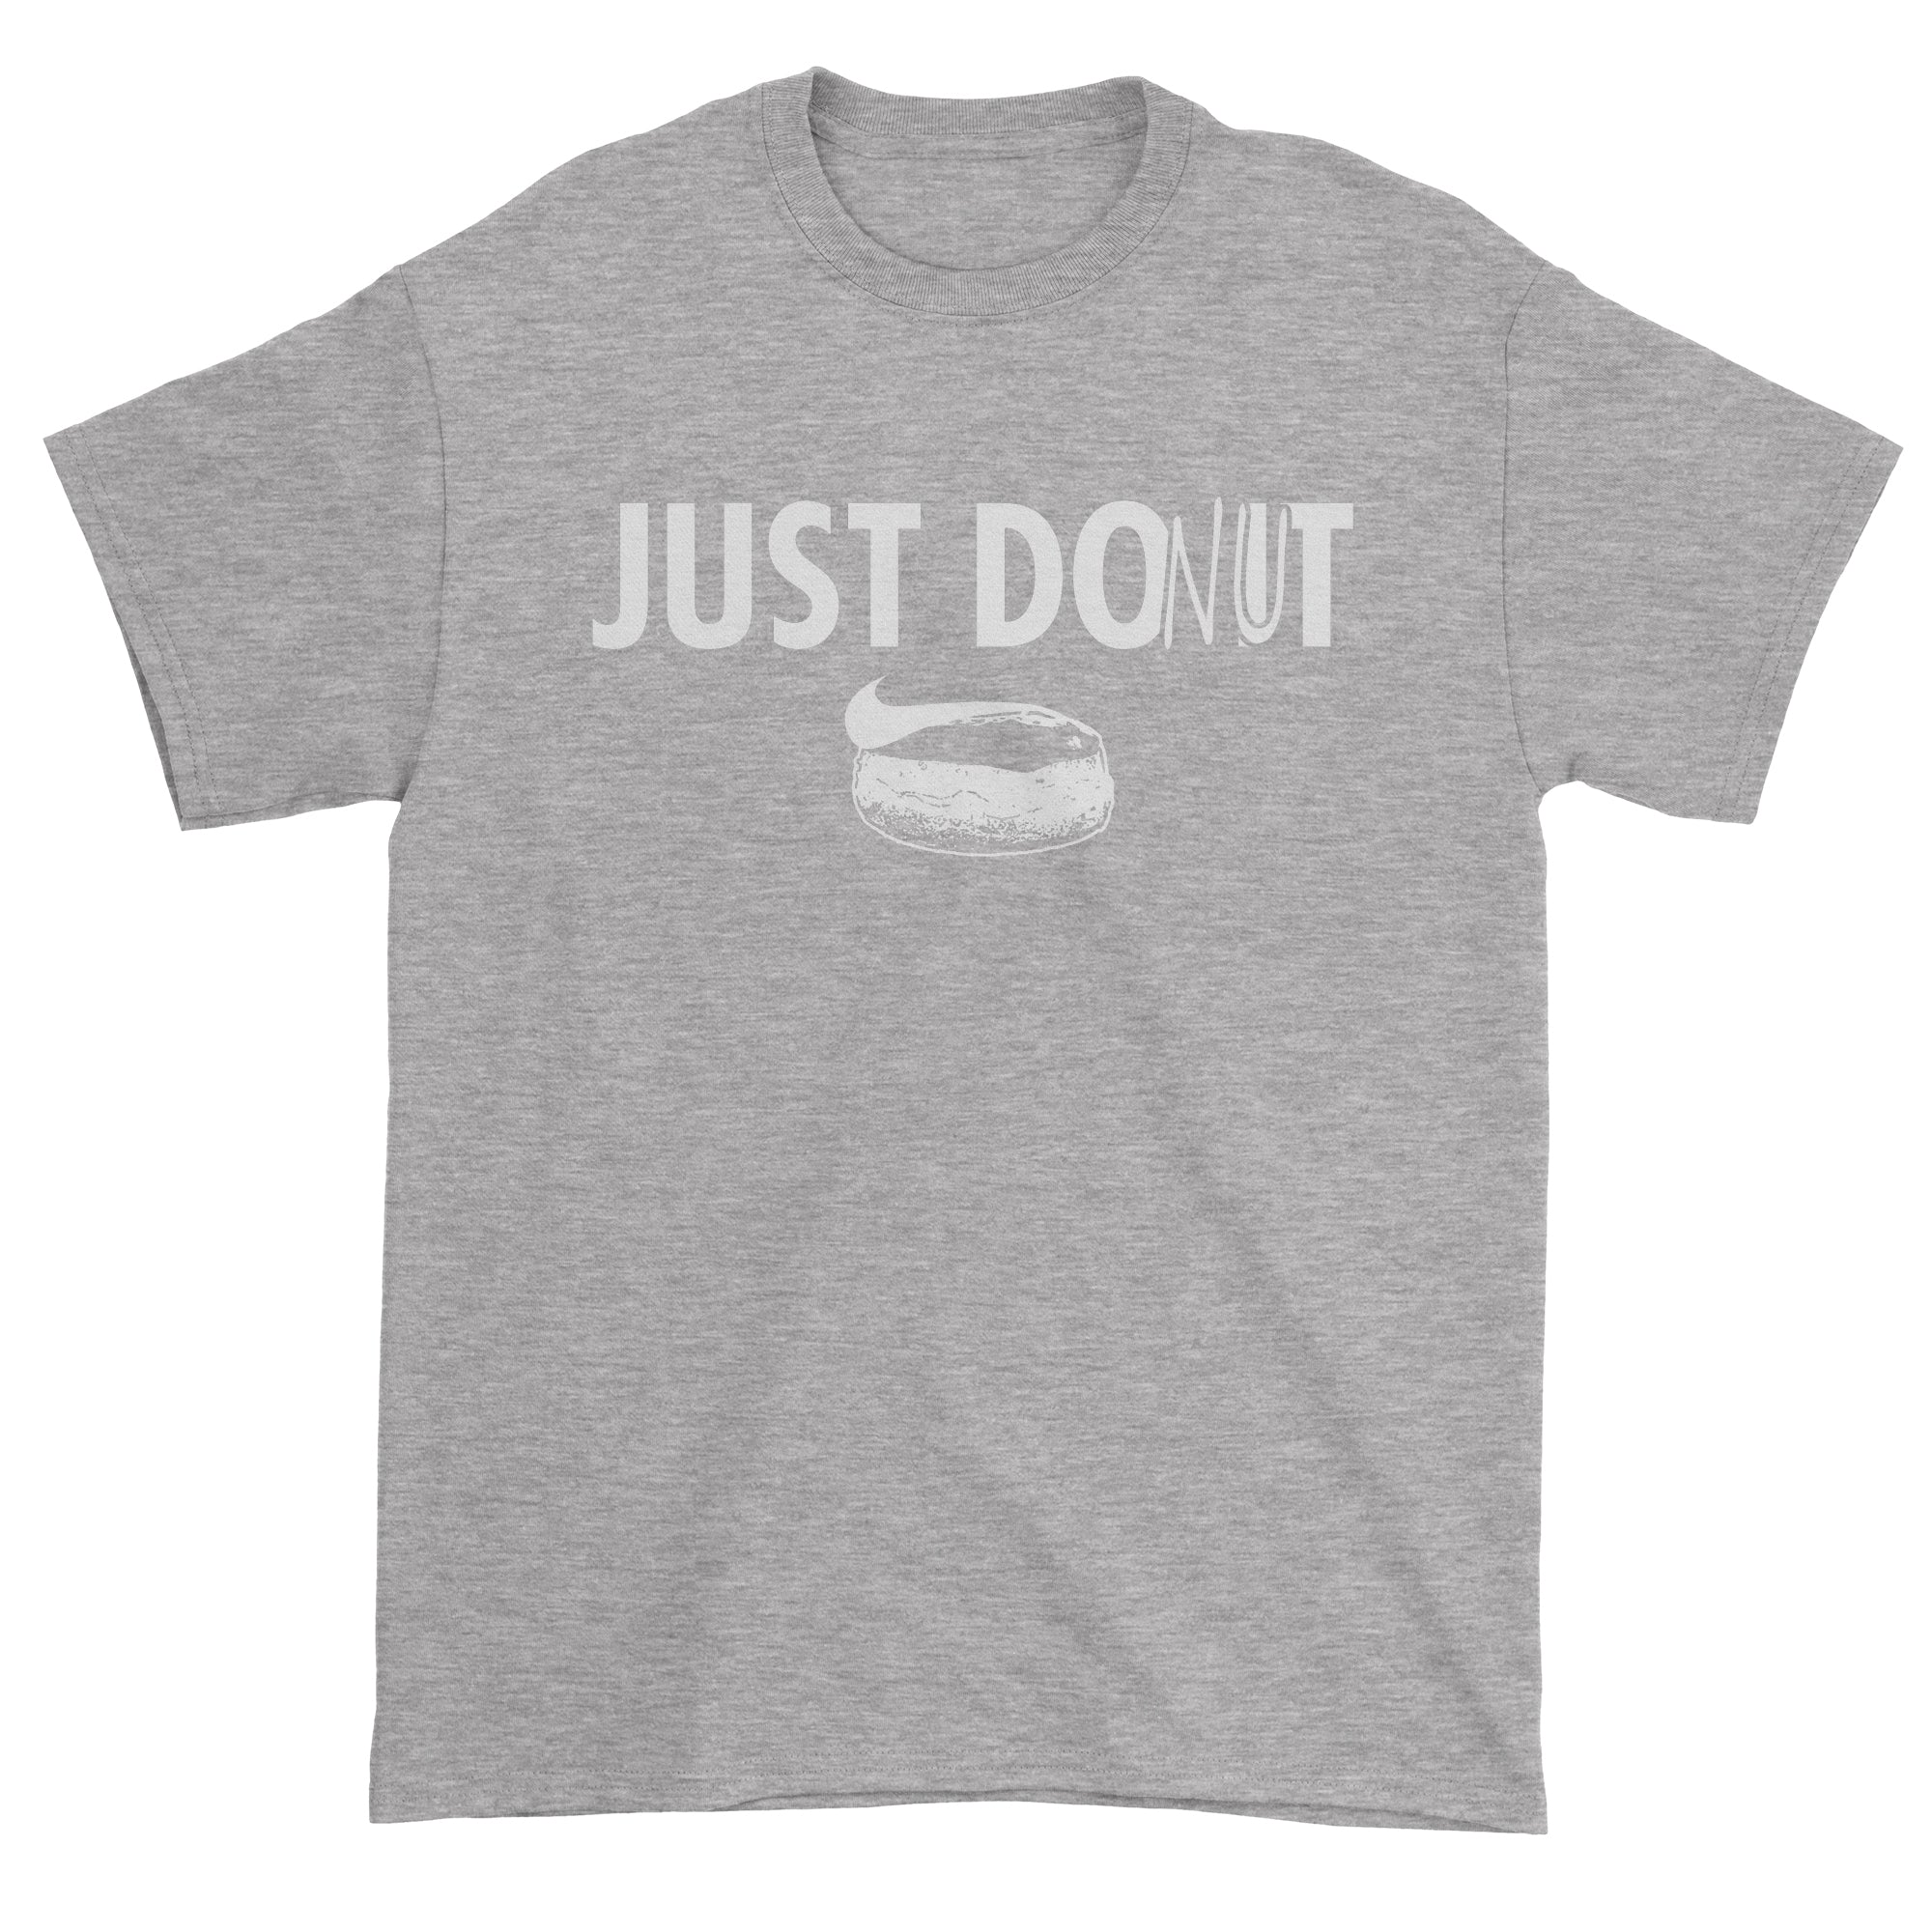 Just Donut Funny Parody Do It Later Men's T-Shirt